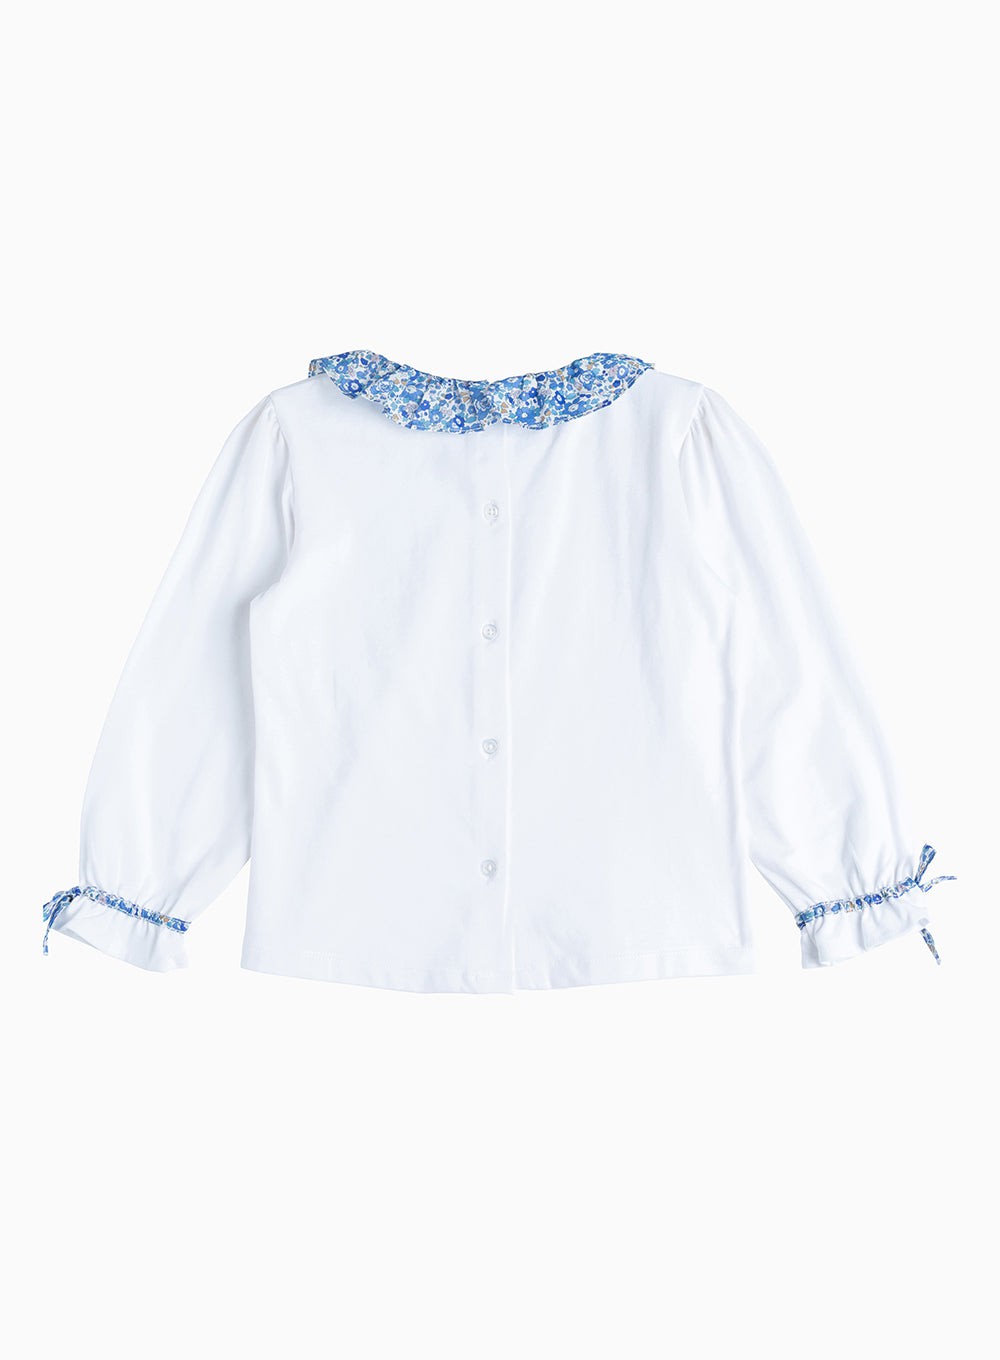 Lily Rose Top Willow Jersey Top in Blue Betsy Ann